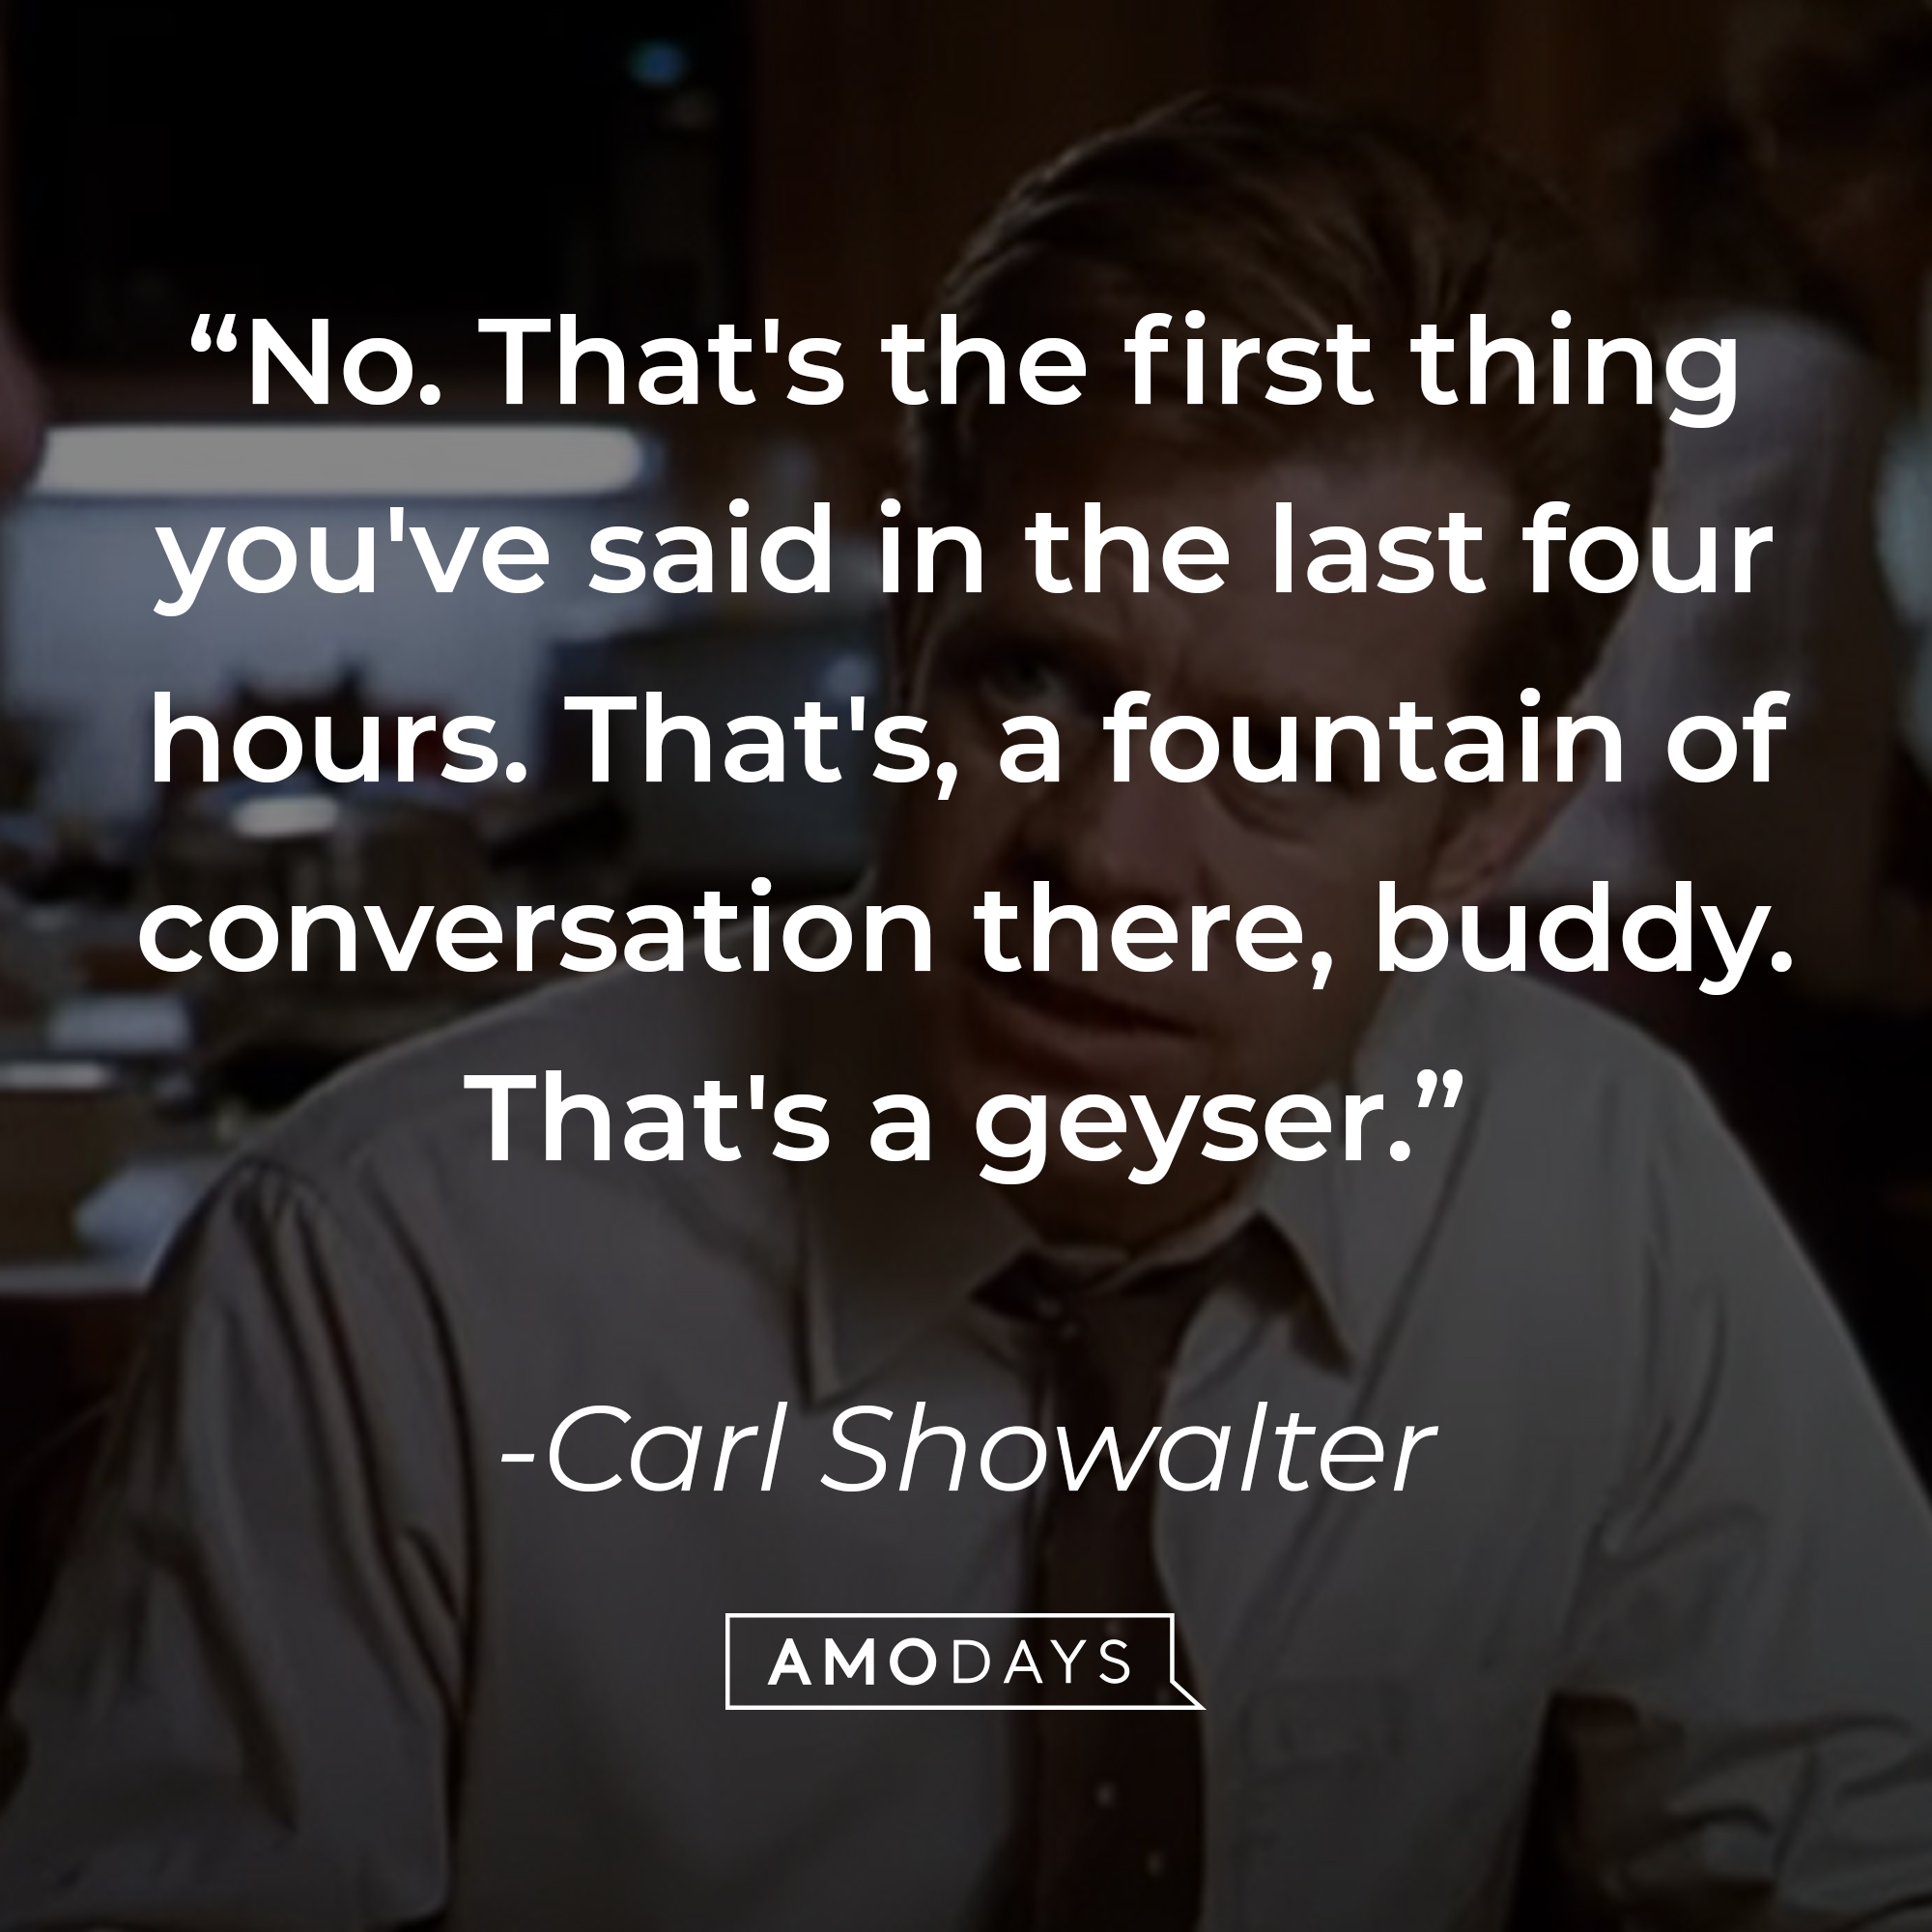 Carl Showalter's quote: "No. That's the first thing you've said in the last four hours. That's, a fountain of conversation there, buddy. That's a geyser." | Source: youtube.com/MGMStudios